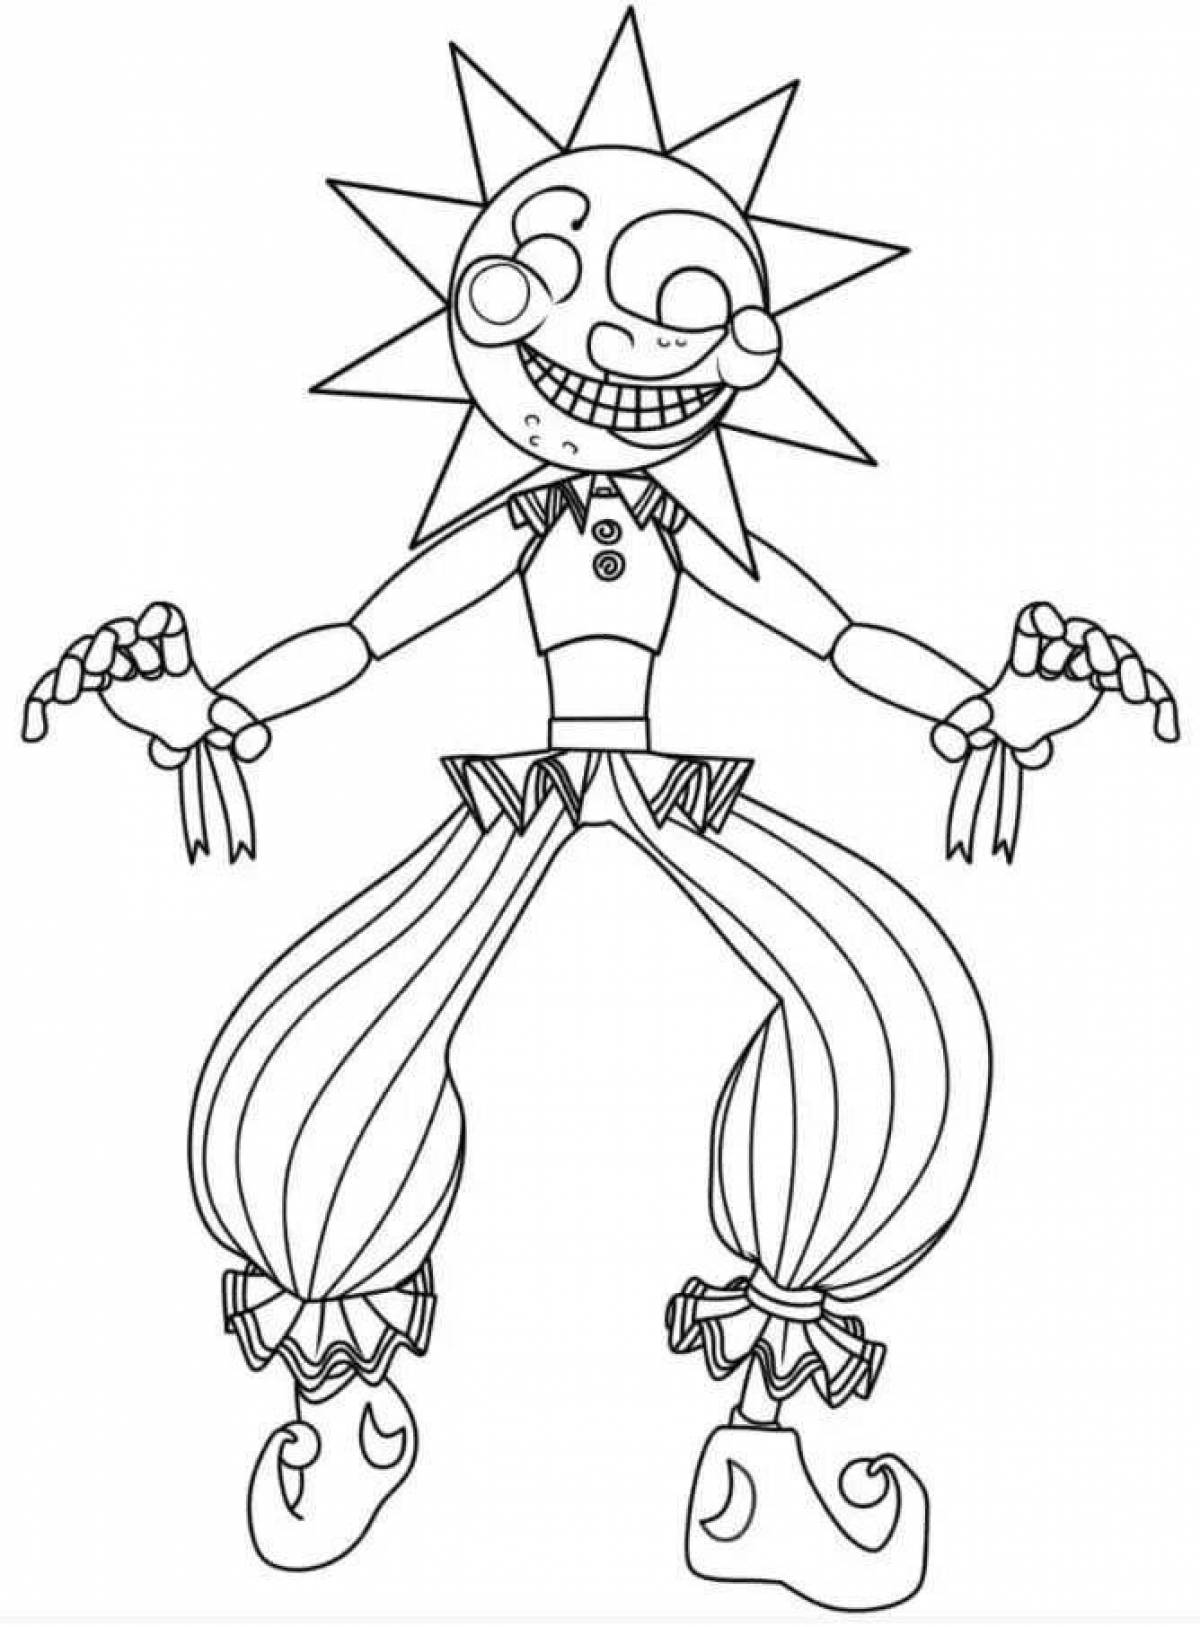 Coloring page stylish glam rock bonnie